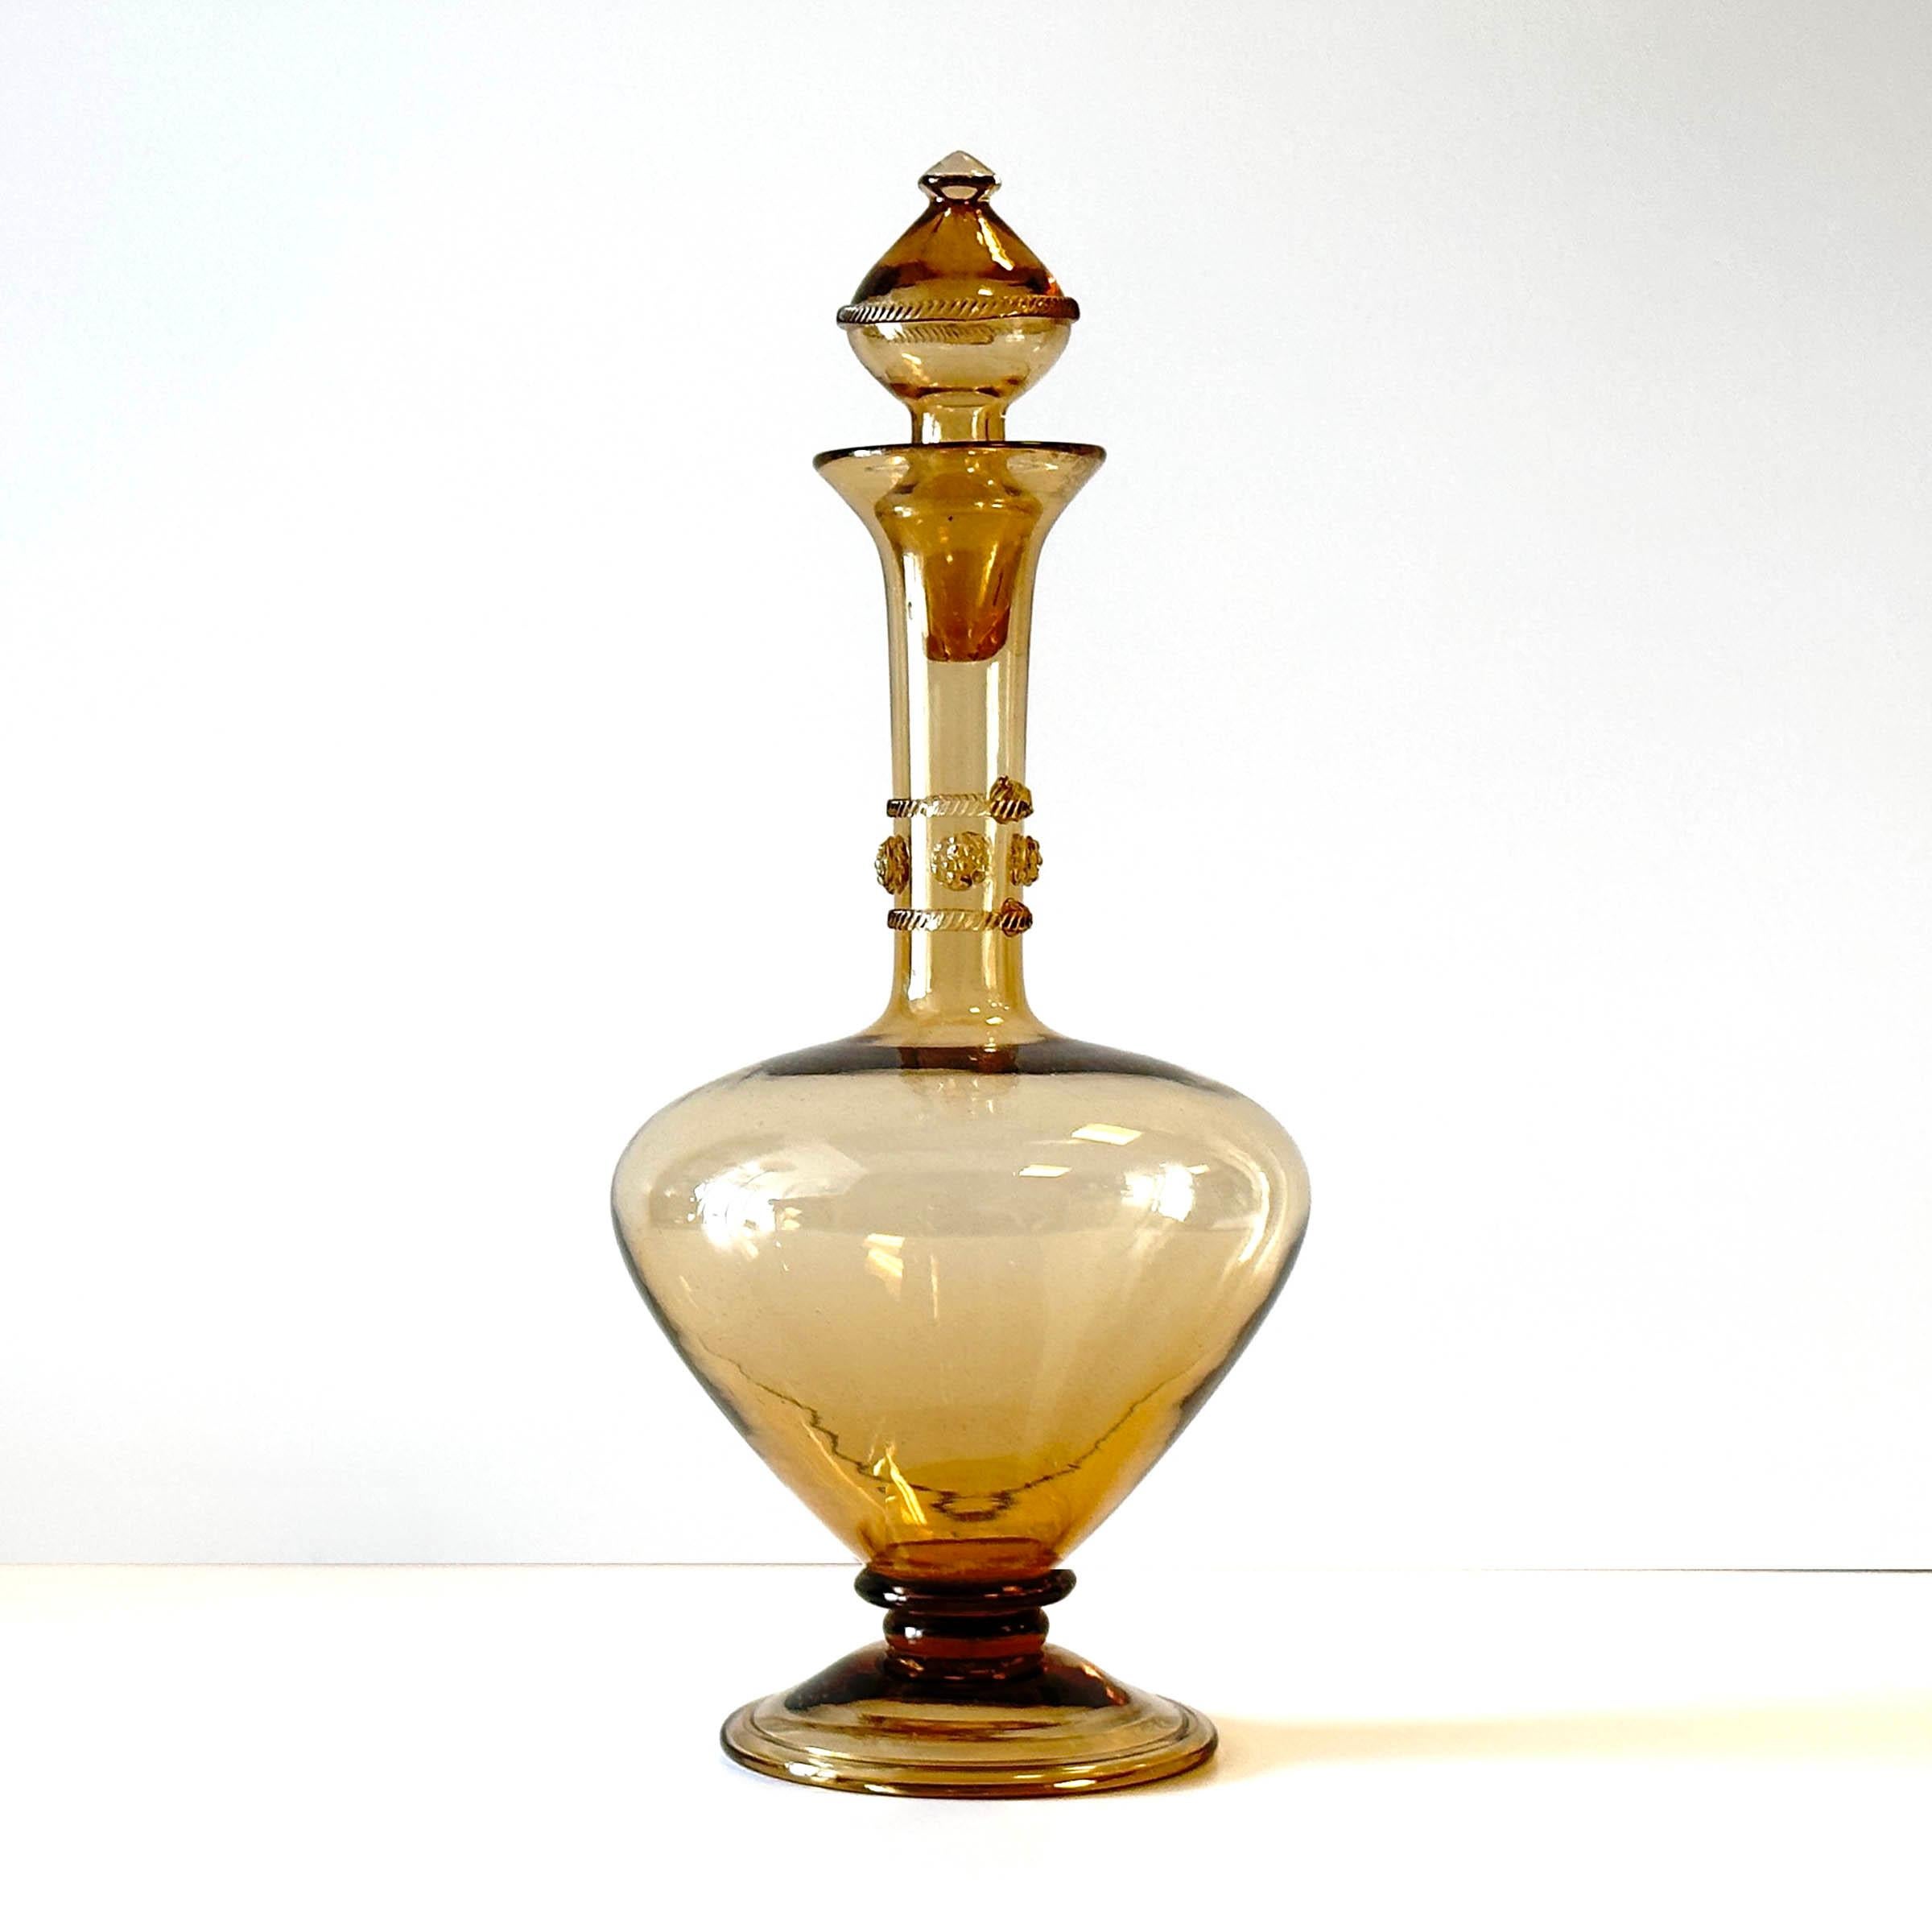 A fine example of a blown glass footed decanter with applied decoration in the style associated with designs from the Czech Republic in the early 20th Century. The angular stopper has decoration too. Nice touch. It is 13 inches tall. No visible